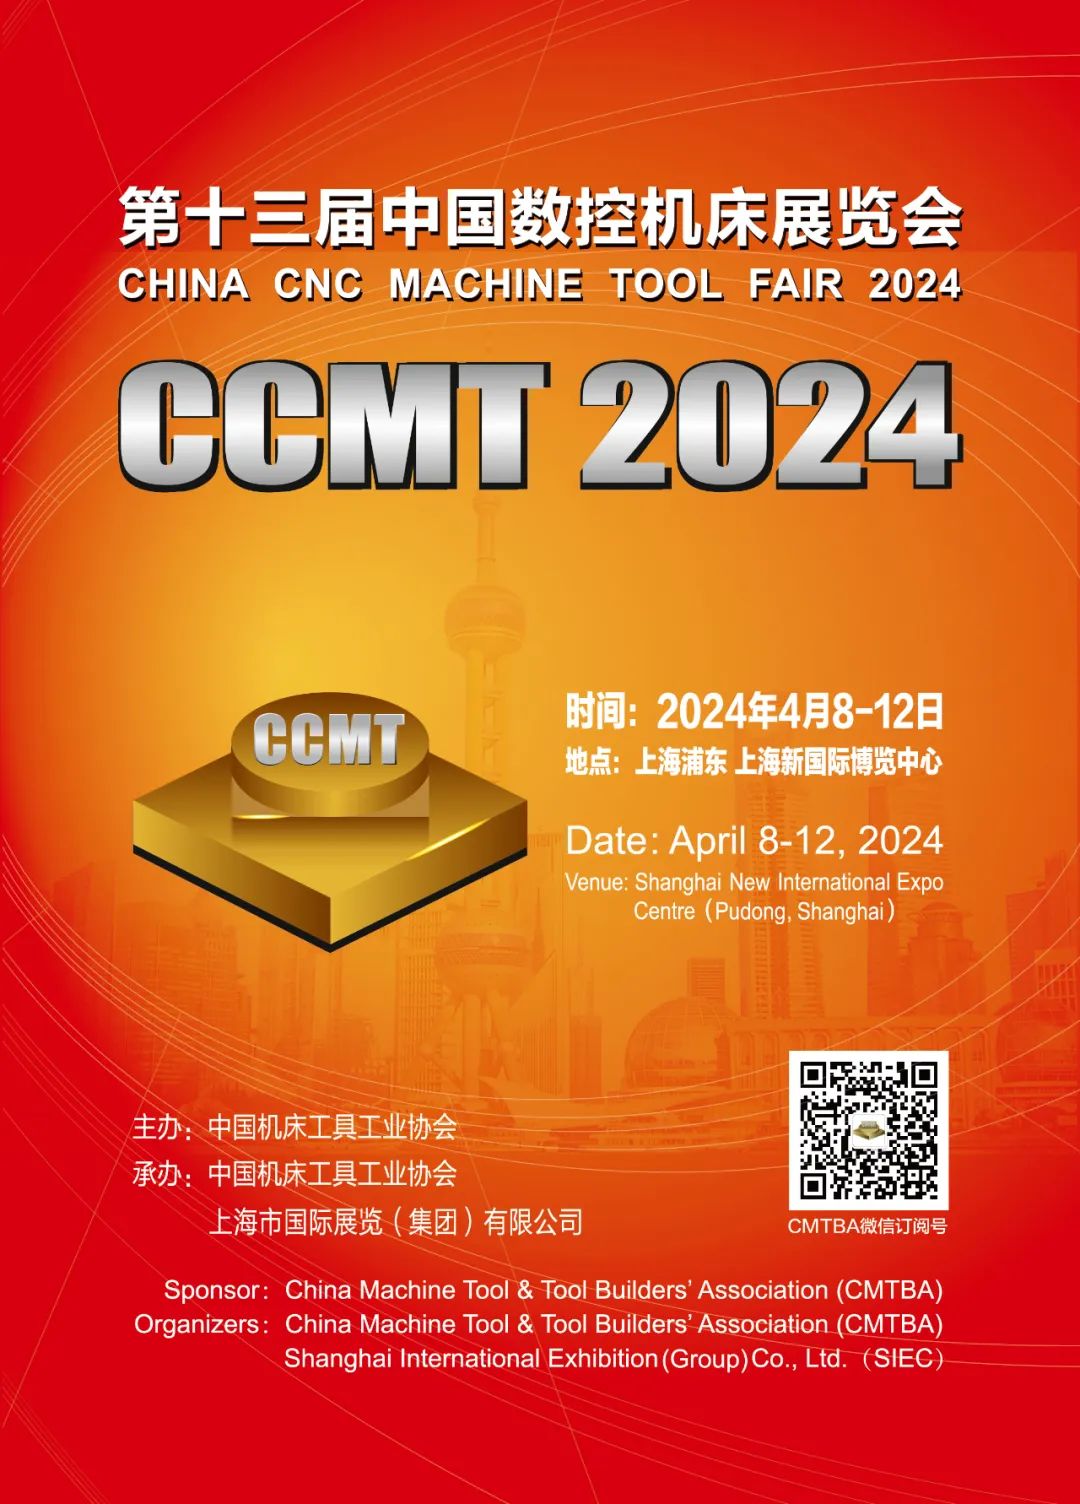 CCMT2024, China’s largest machine tool exhibition was grandly opened!